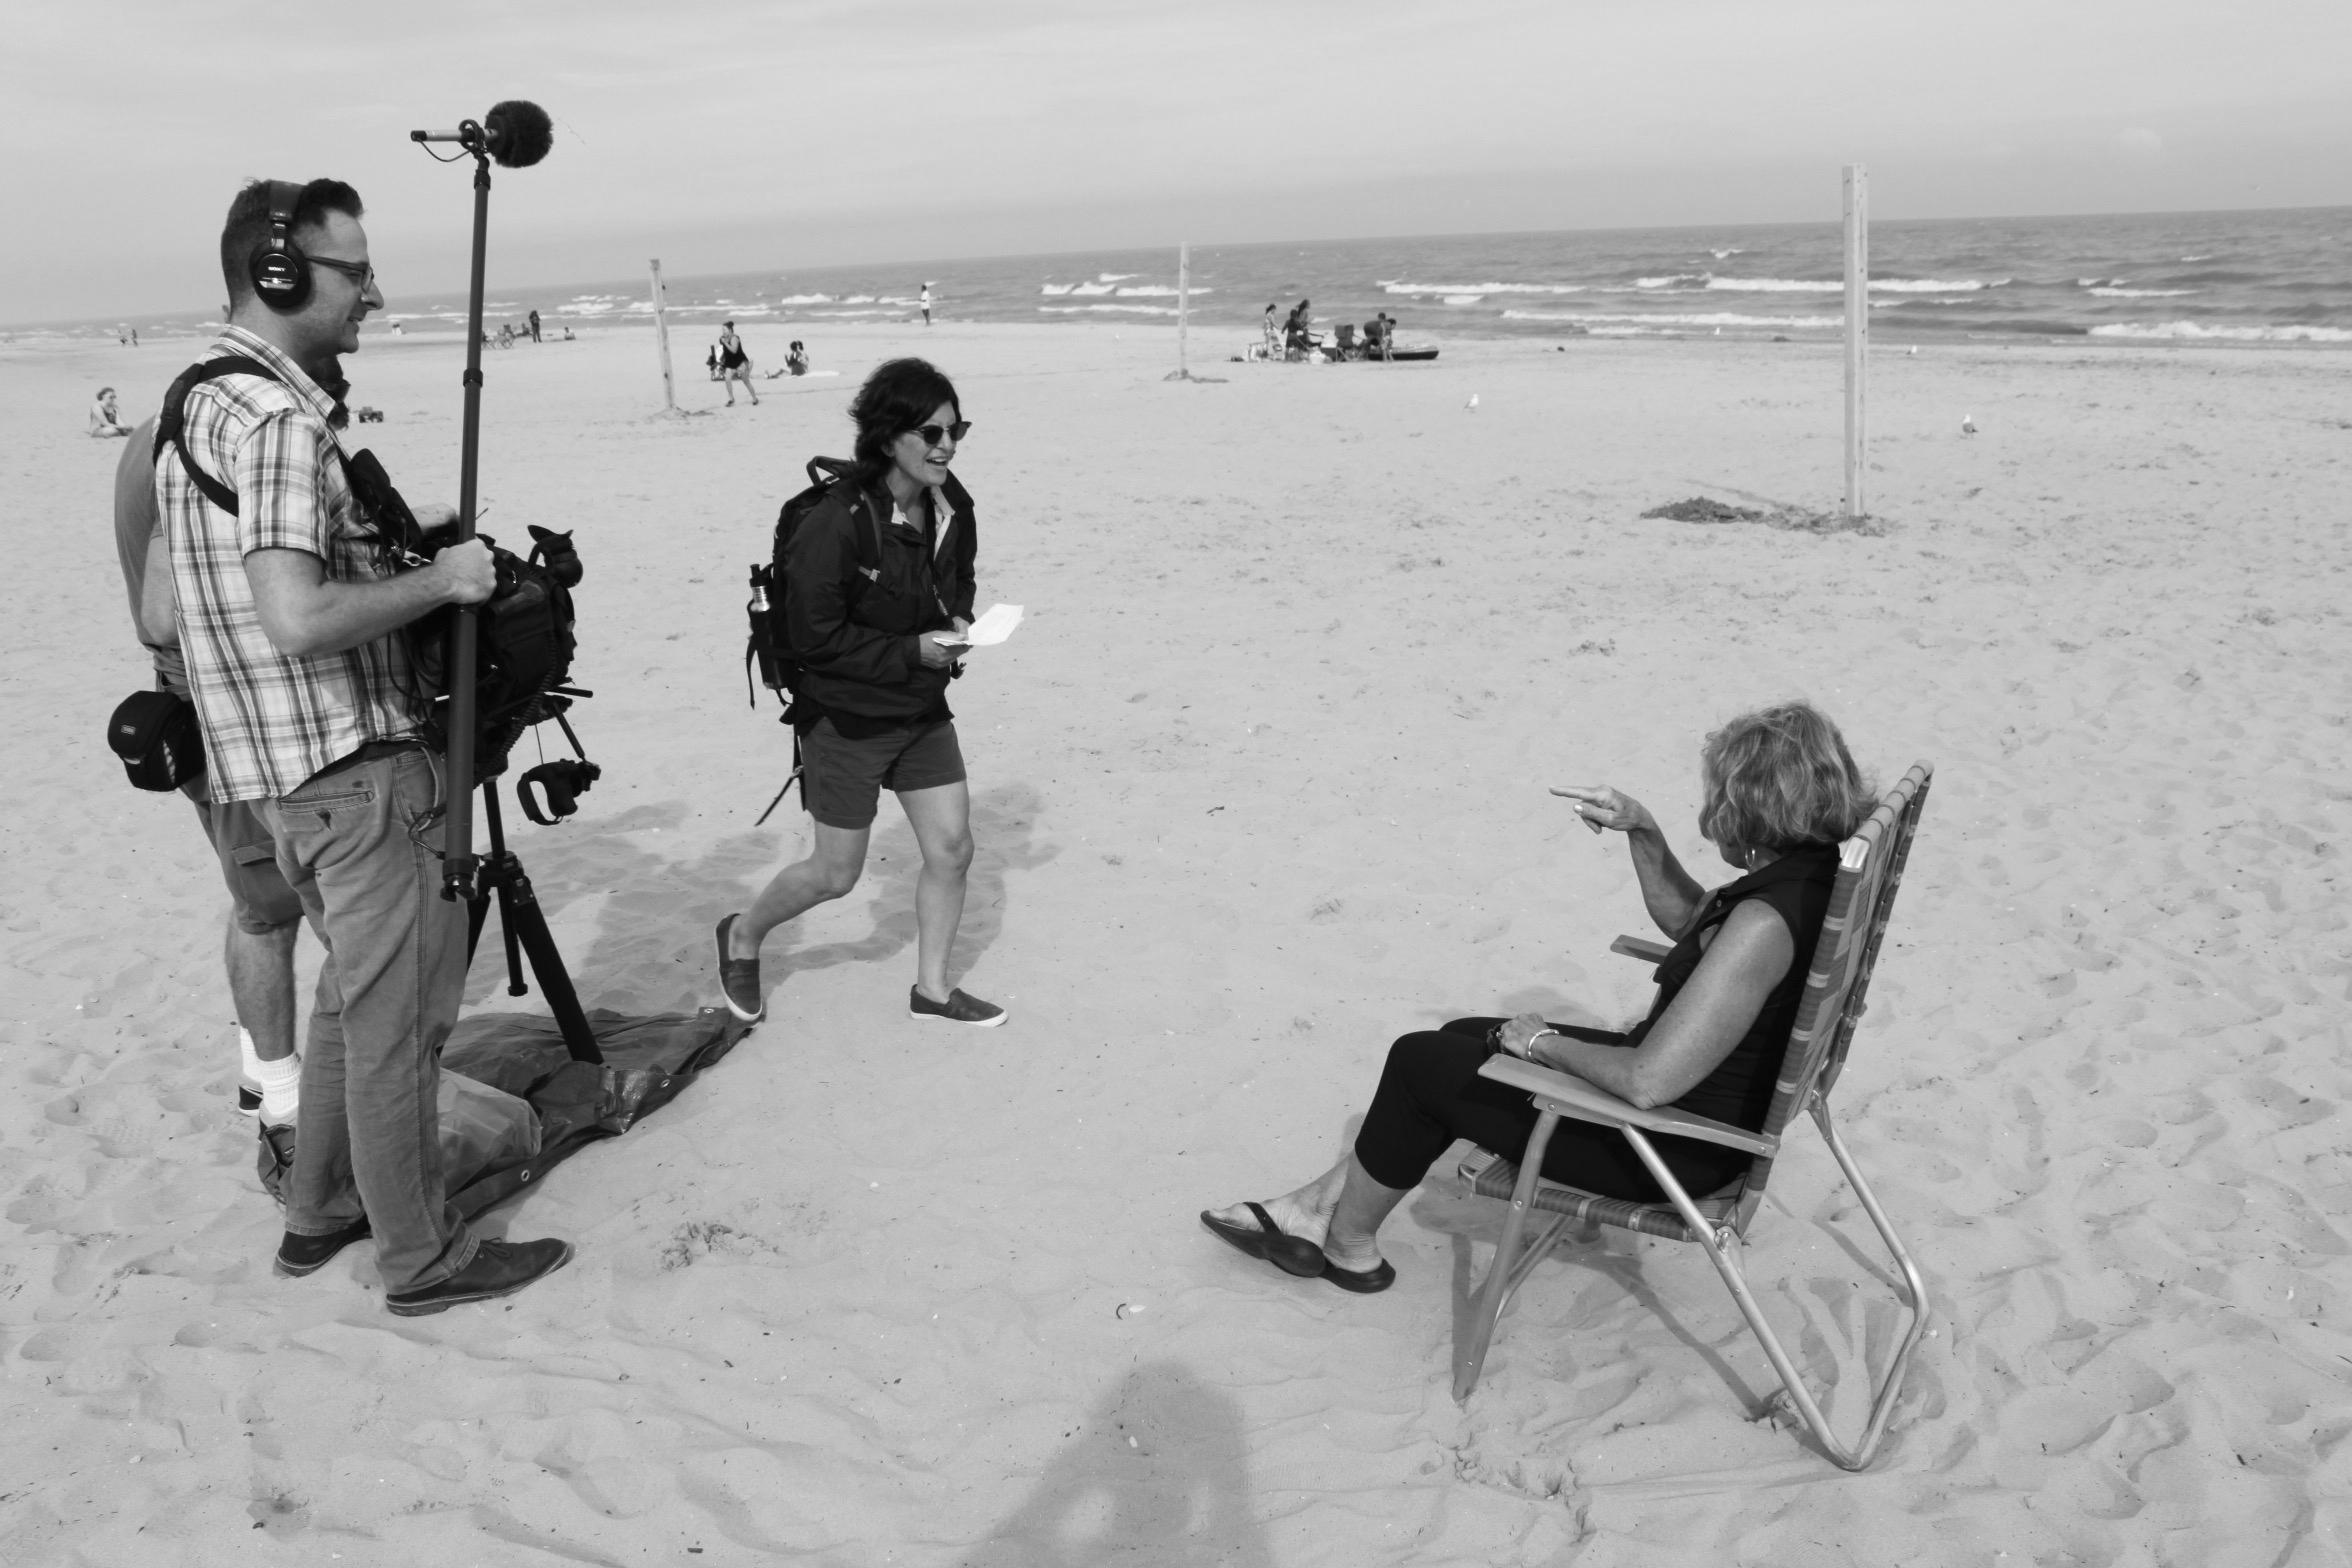 Director Deb Tolchinsky filming the documentary True Memories and Other Falsehoods with Penny Beerntsen at Neshotah beach in Two Rivers, Wisconsin